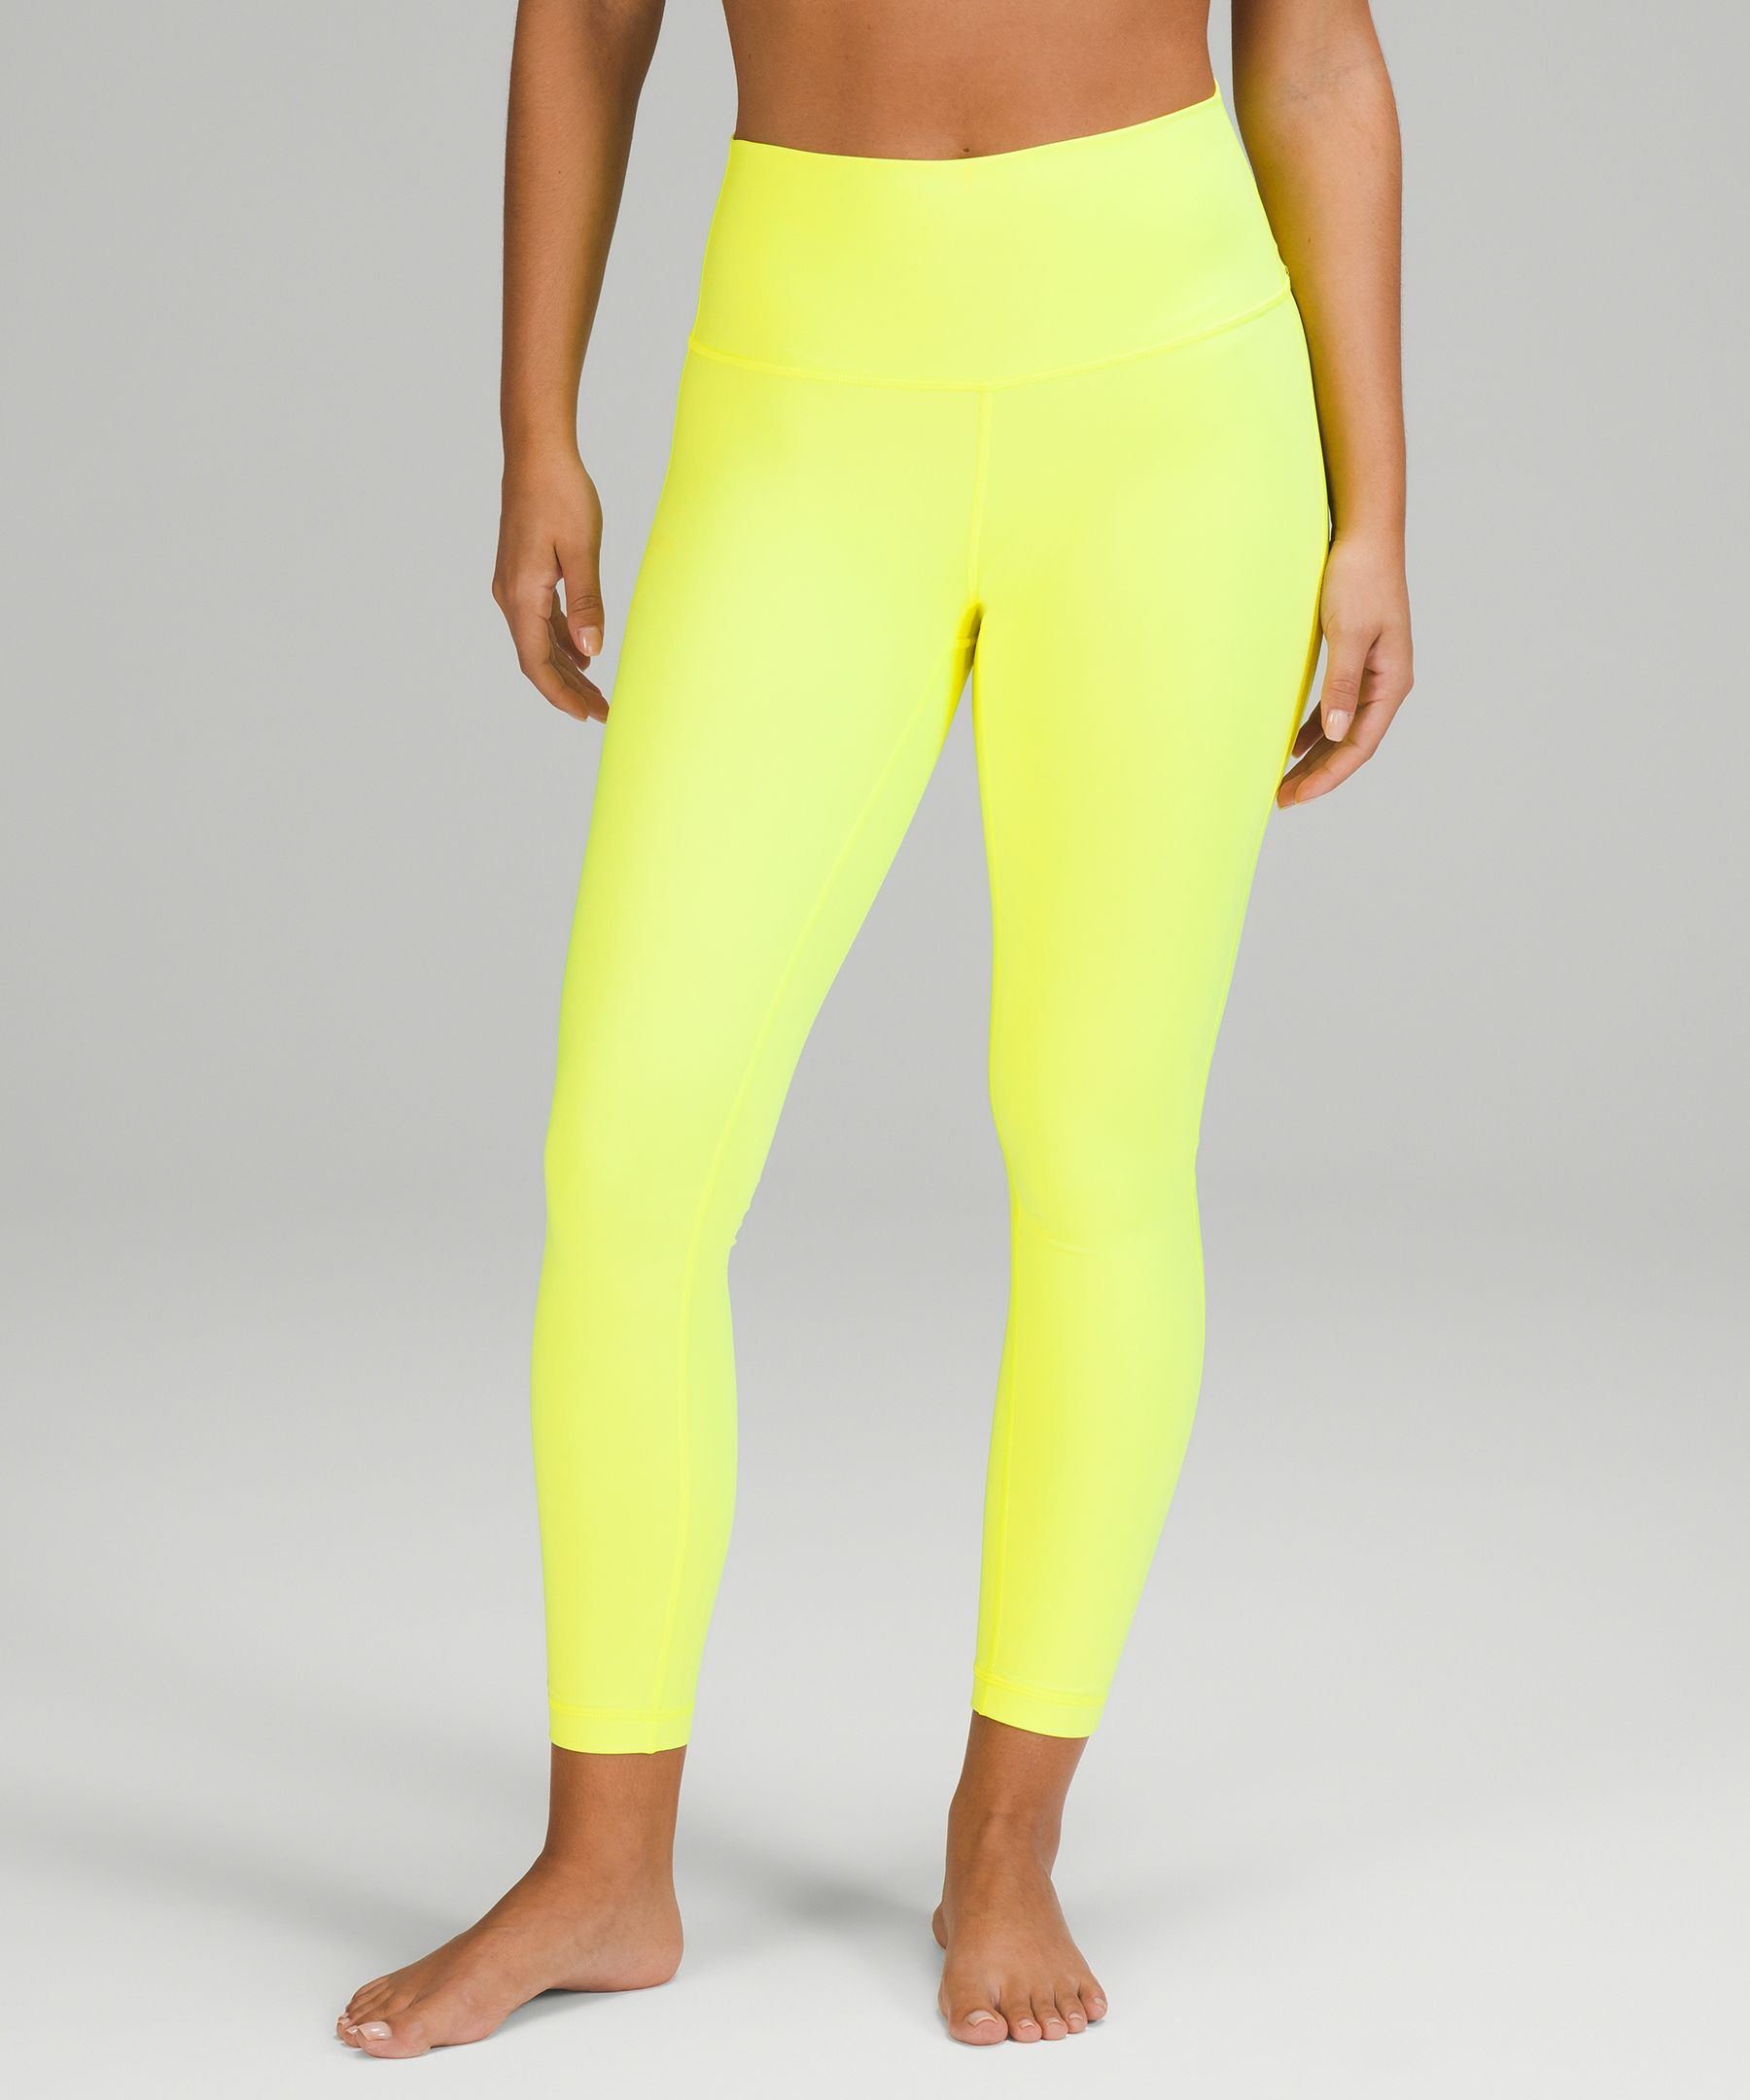 Lululemon Wunder Under High-rise Tights 25" Full-on Luxtreme In Highlight Yellow